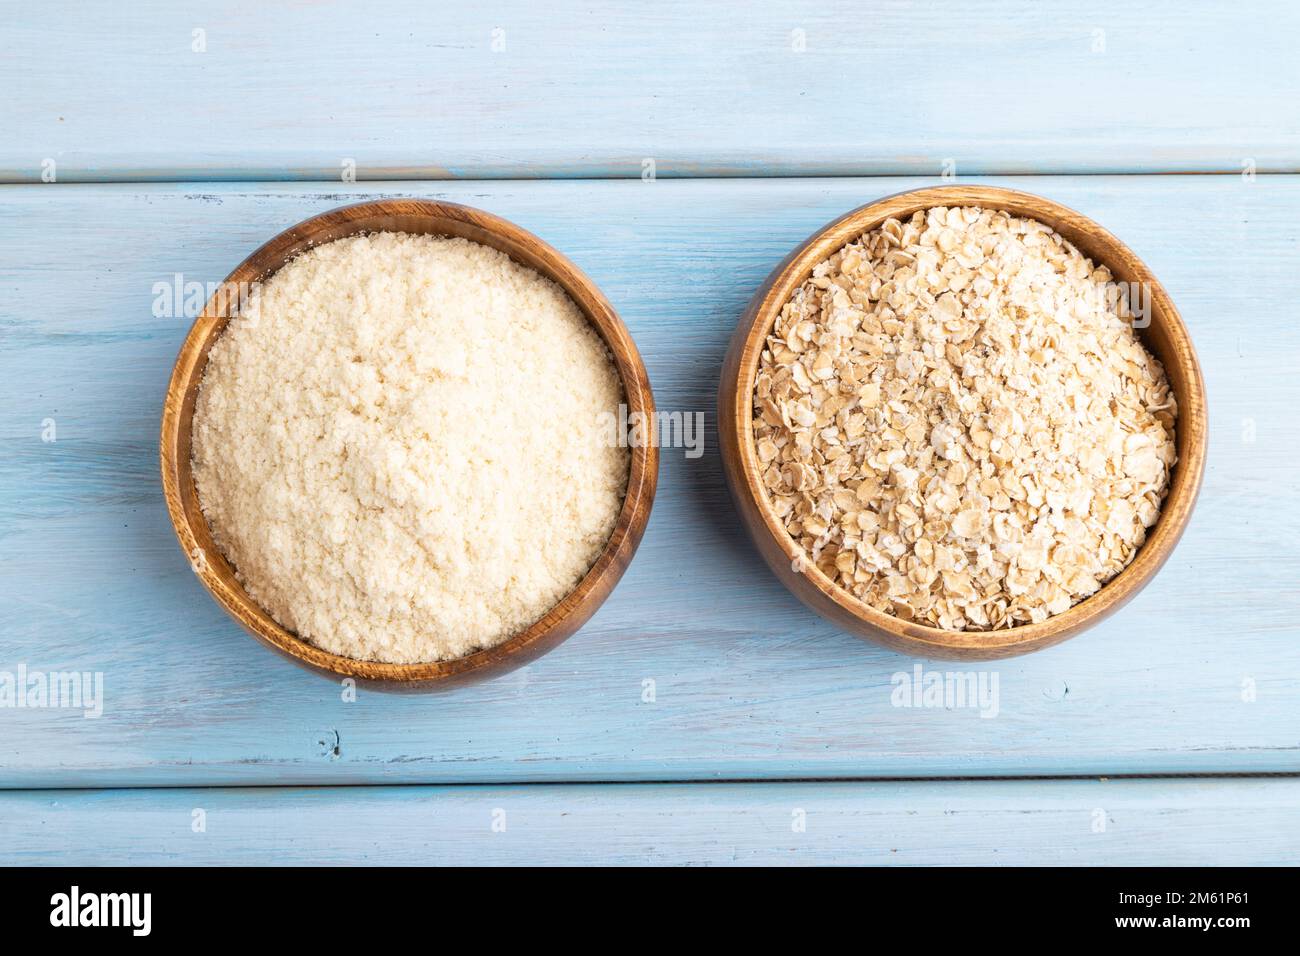 Powdered milk and oatmeal baby food mix, infant formula on blue wooden background. Top view, flat lay, artificial feeding concept. Stock Photo